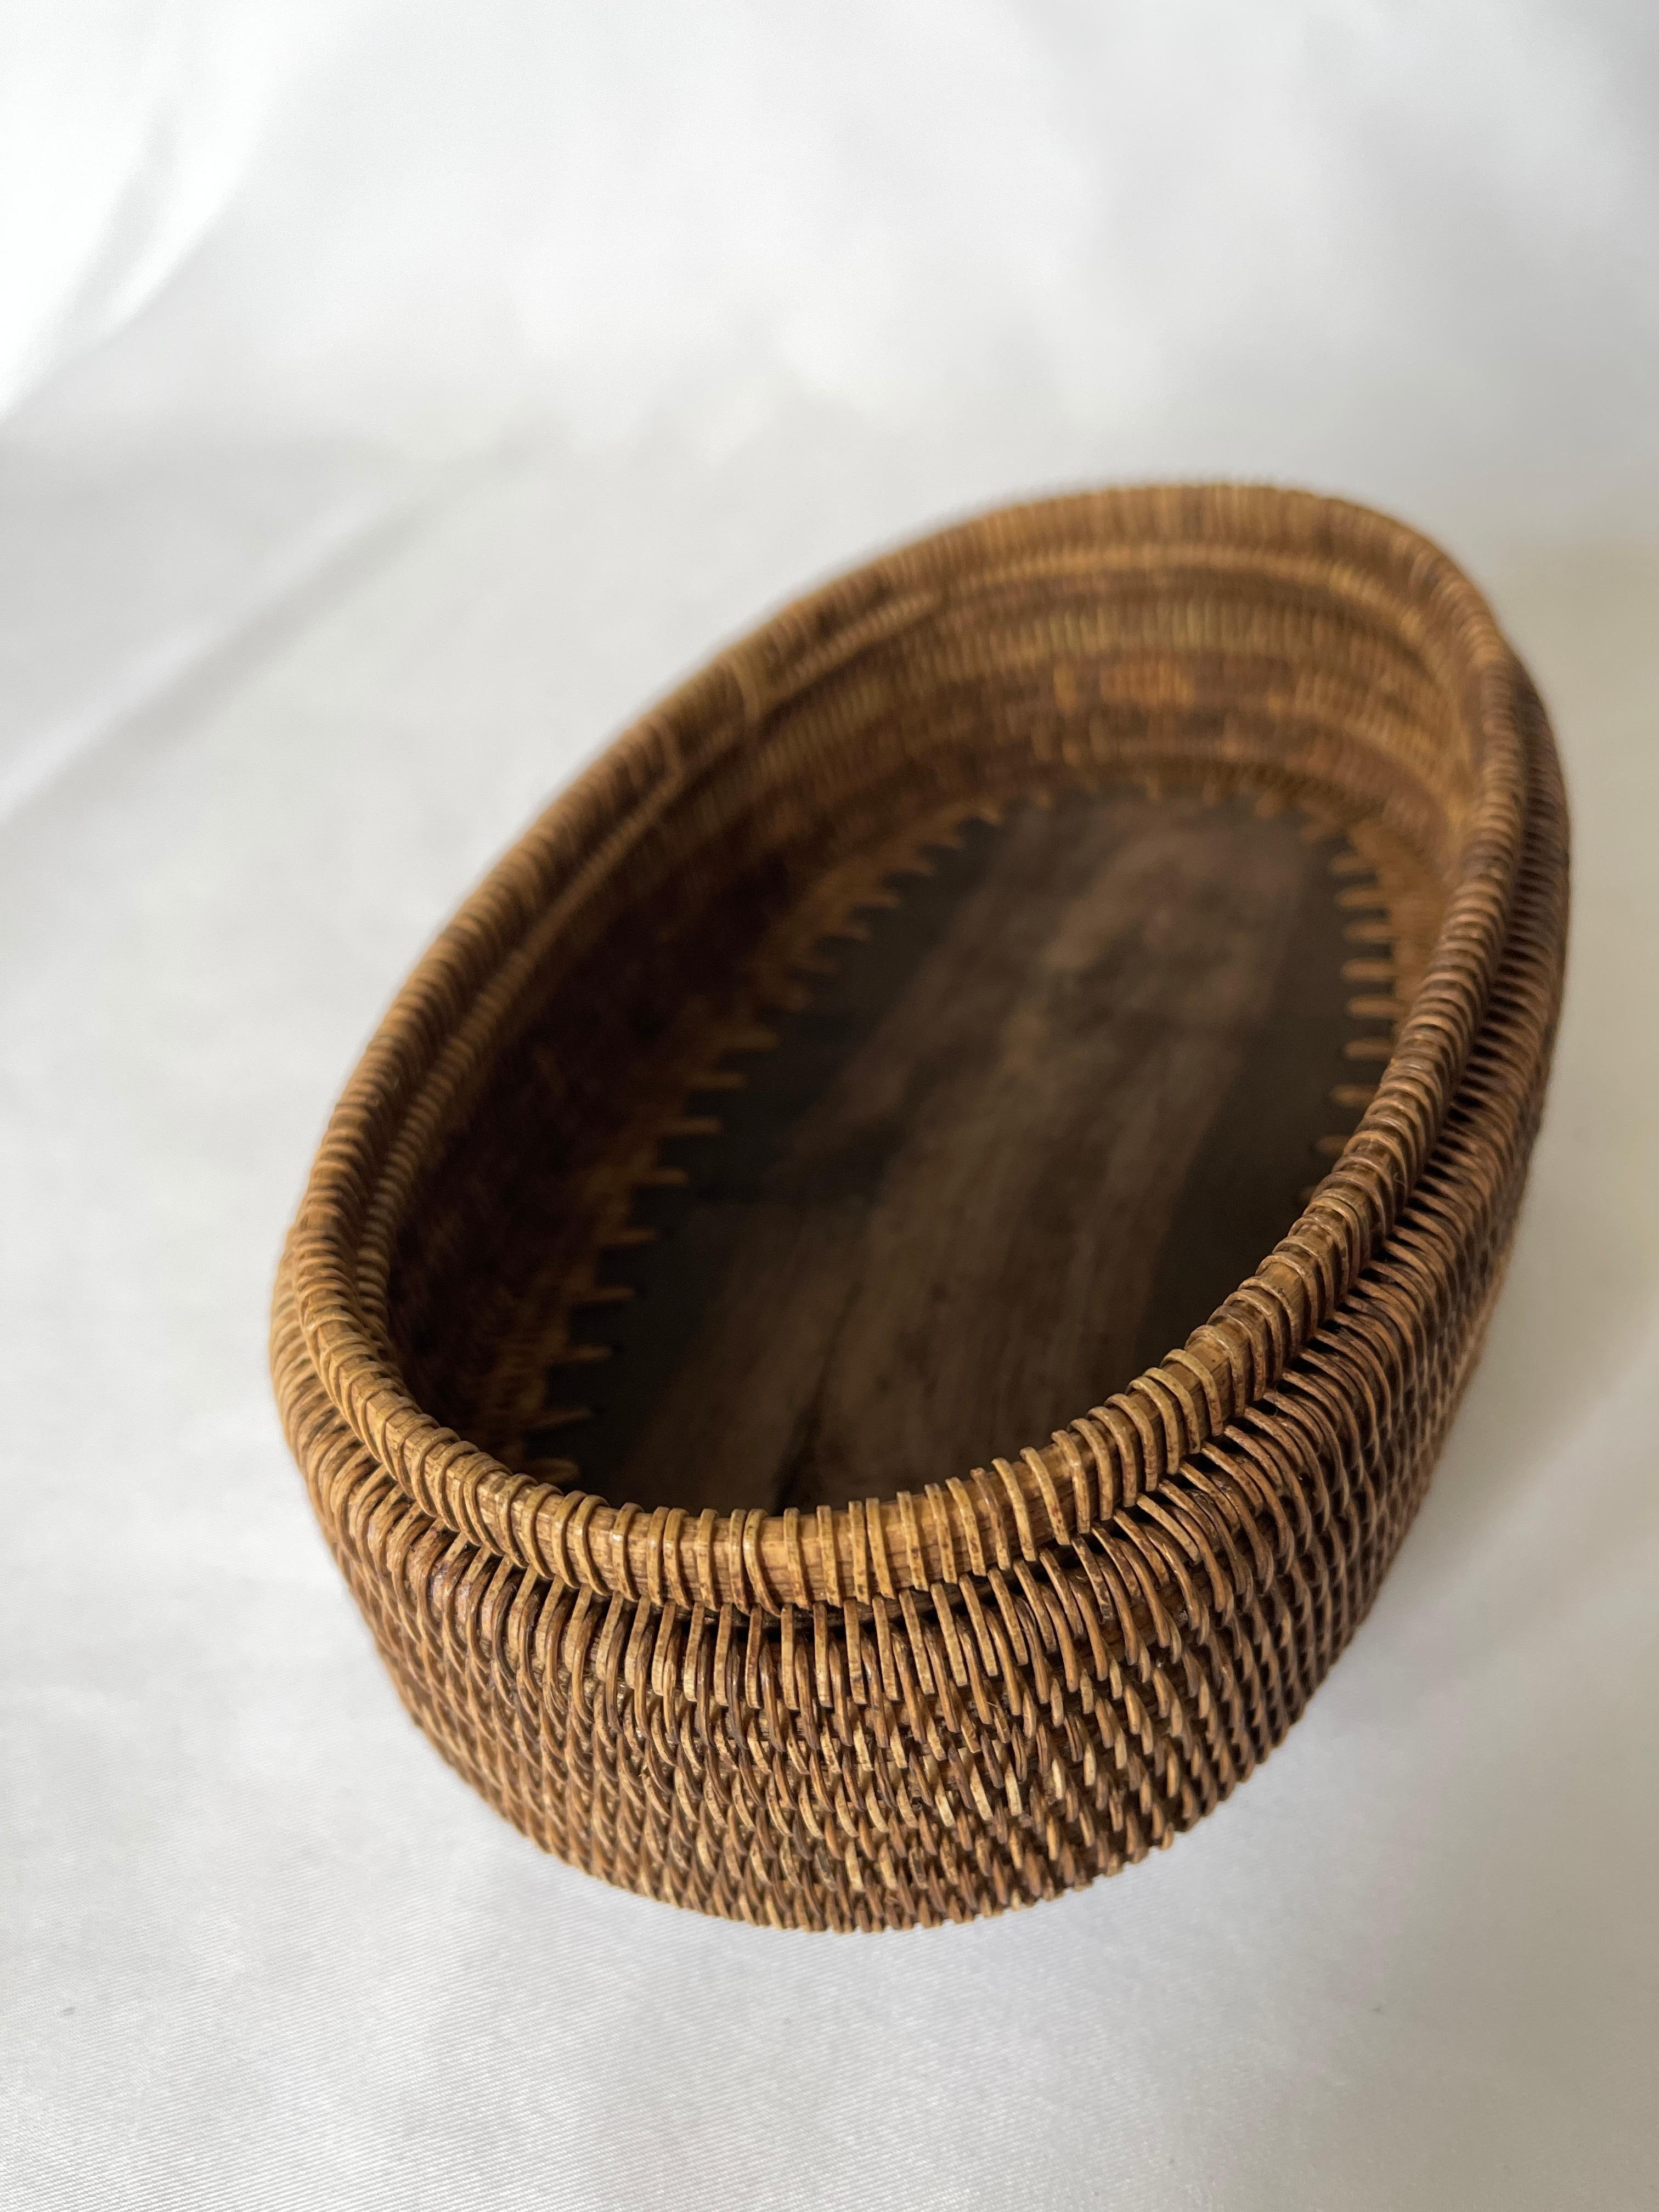 Hand Woven Oval Reed Basket with Carved Wooden Crawfish Lid 1